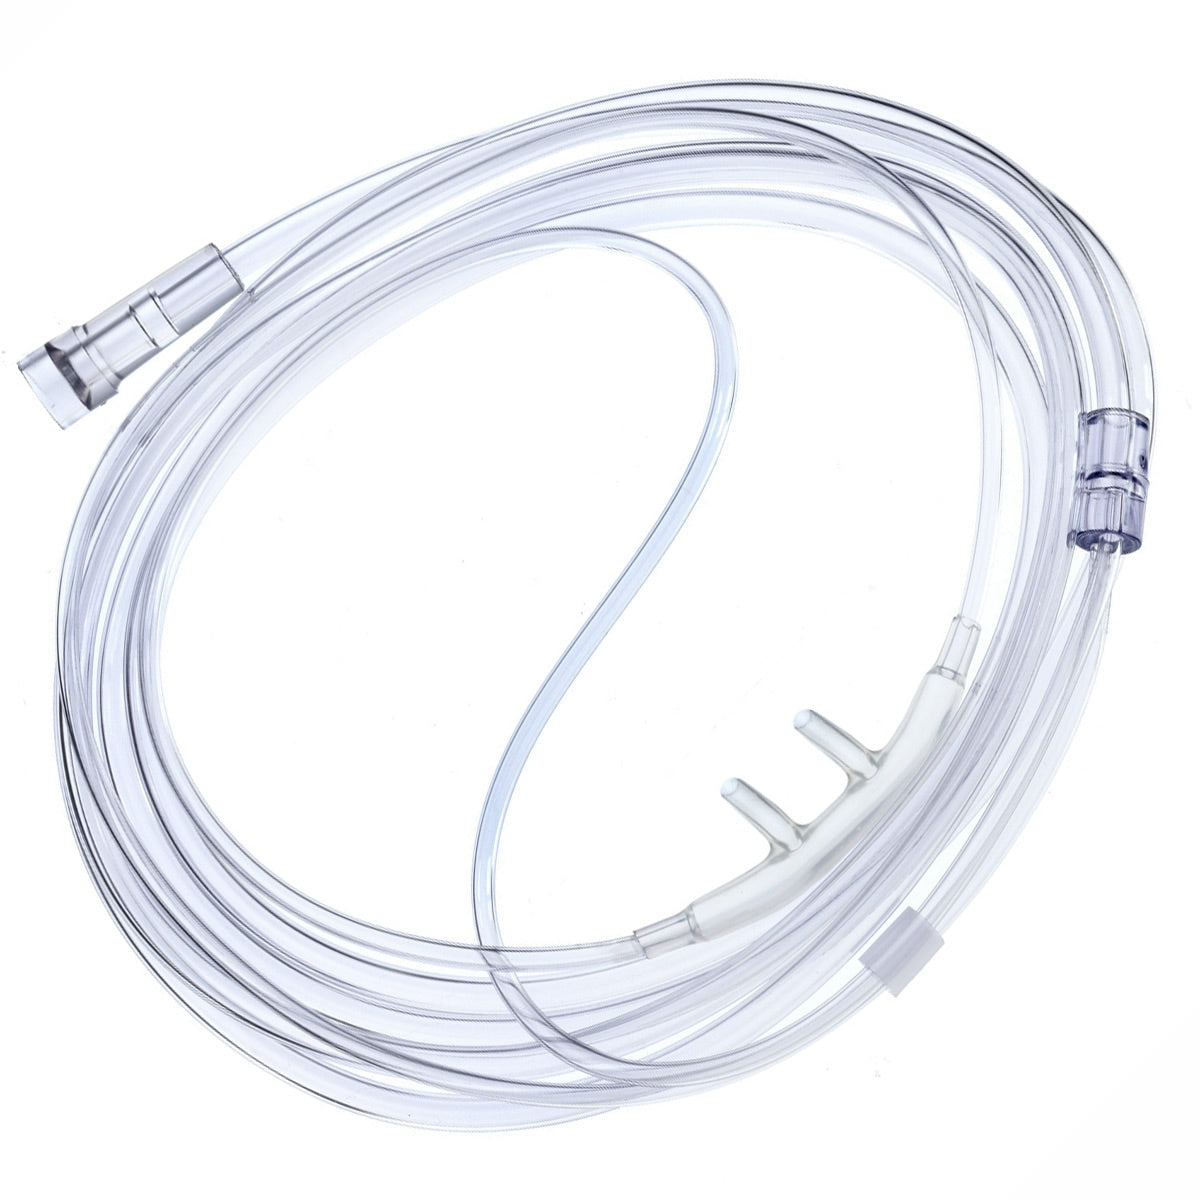 Softech Adult Nasal Cannula with 4 Foot Star Lumen Oxygen Supply Tubing